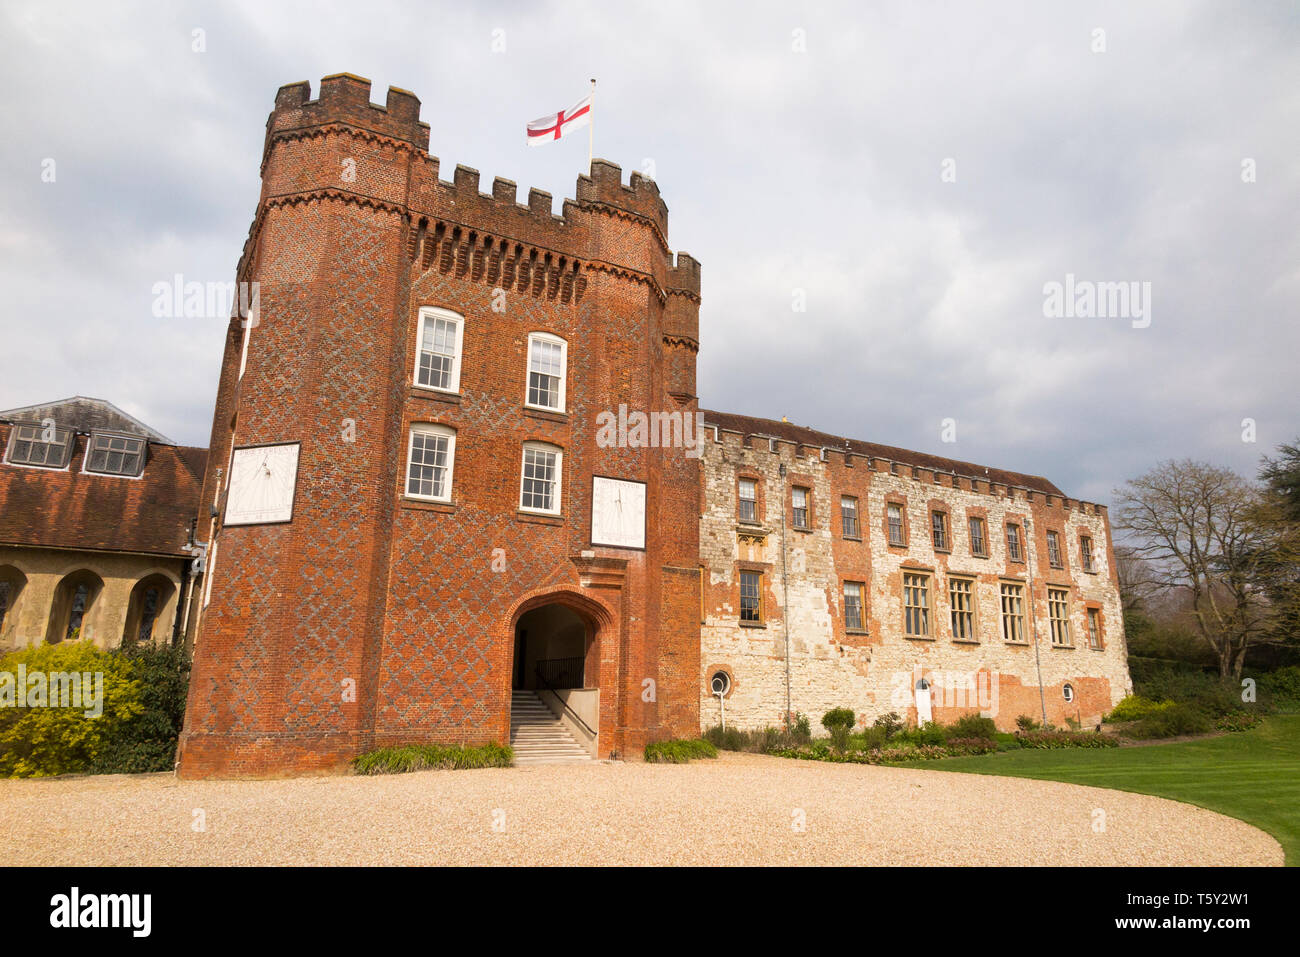 The Bishop's Palace tower of Farnham Castle, flying the flag of St George on a sunny day. Castle Hill, Farnham. Surrey, UK  (108) Stock Photo